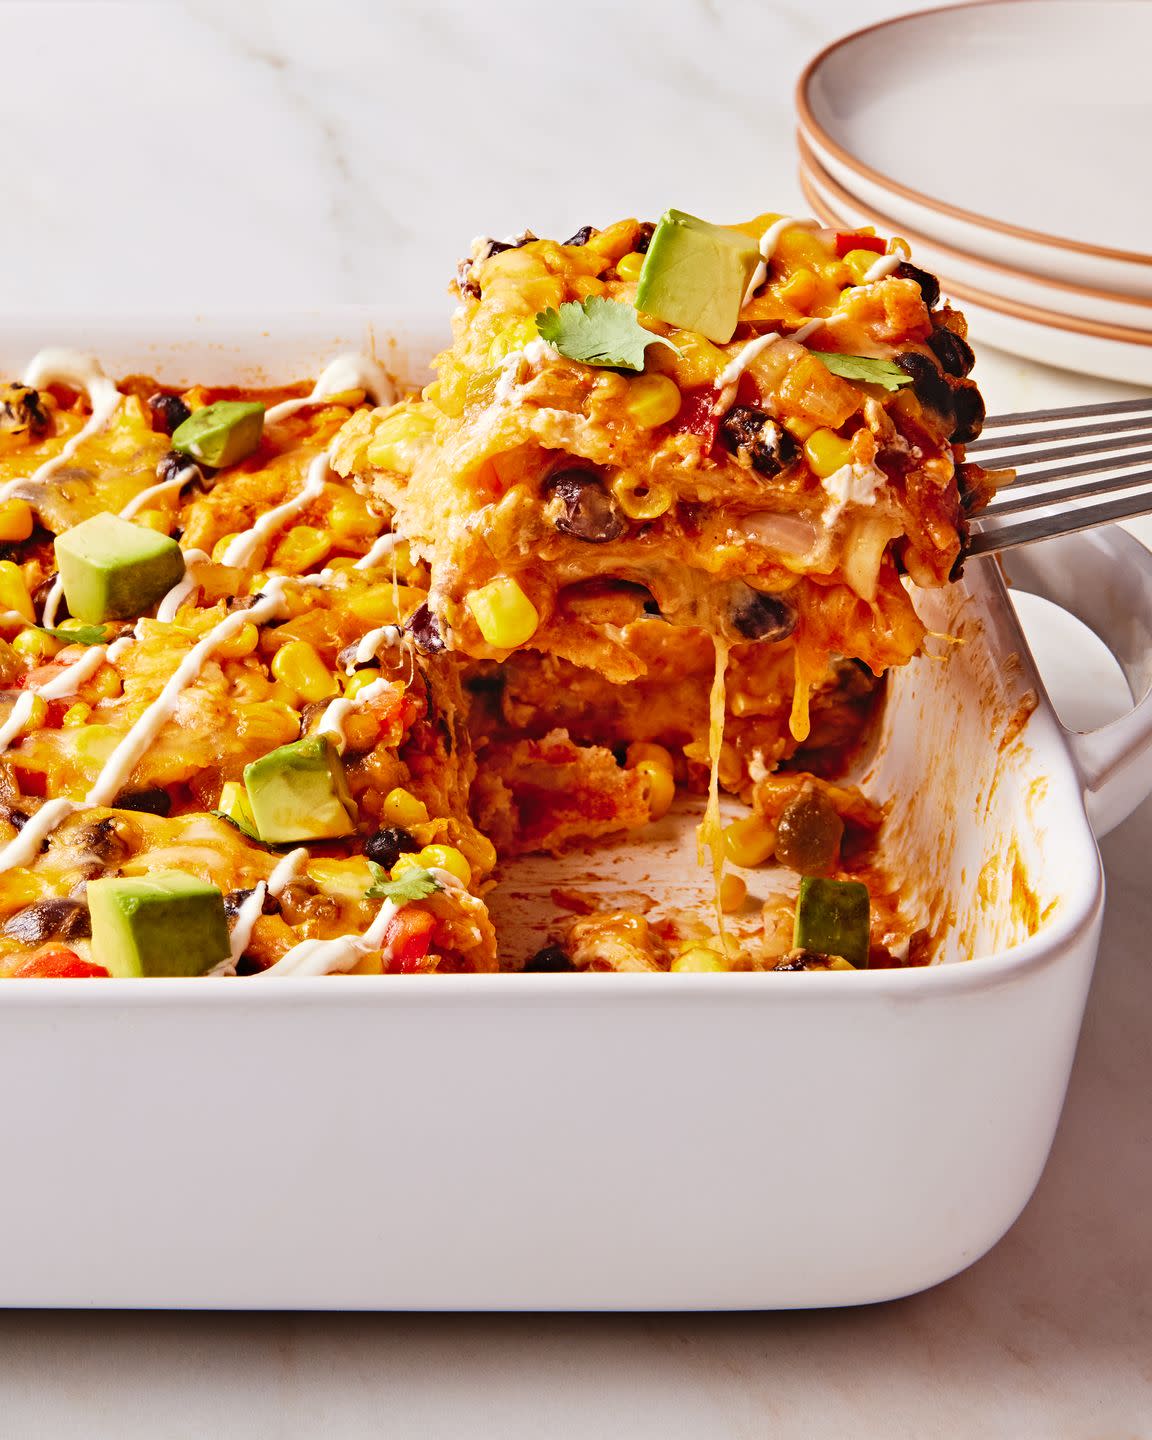 enchilada fillings in a casserole topped with avocado cubes